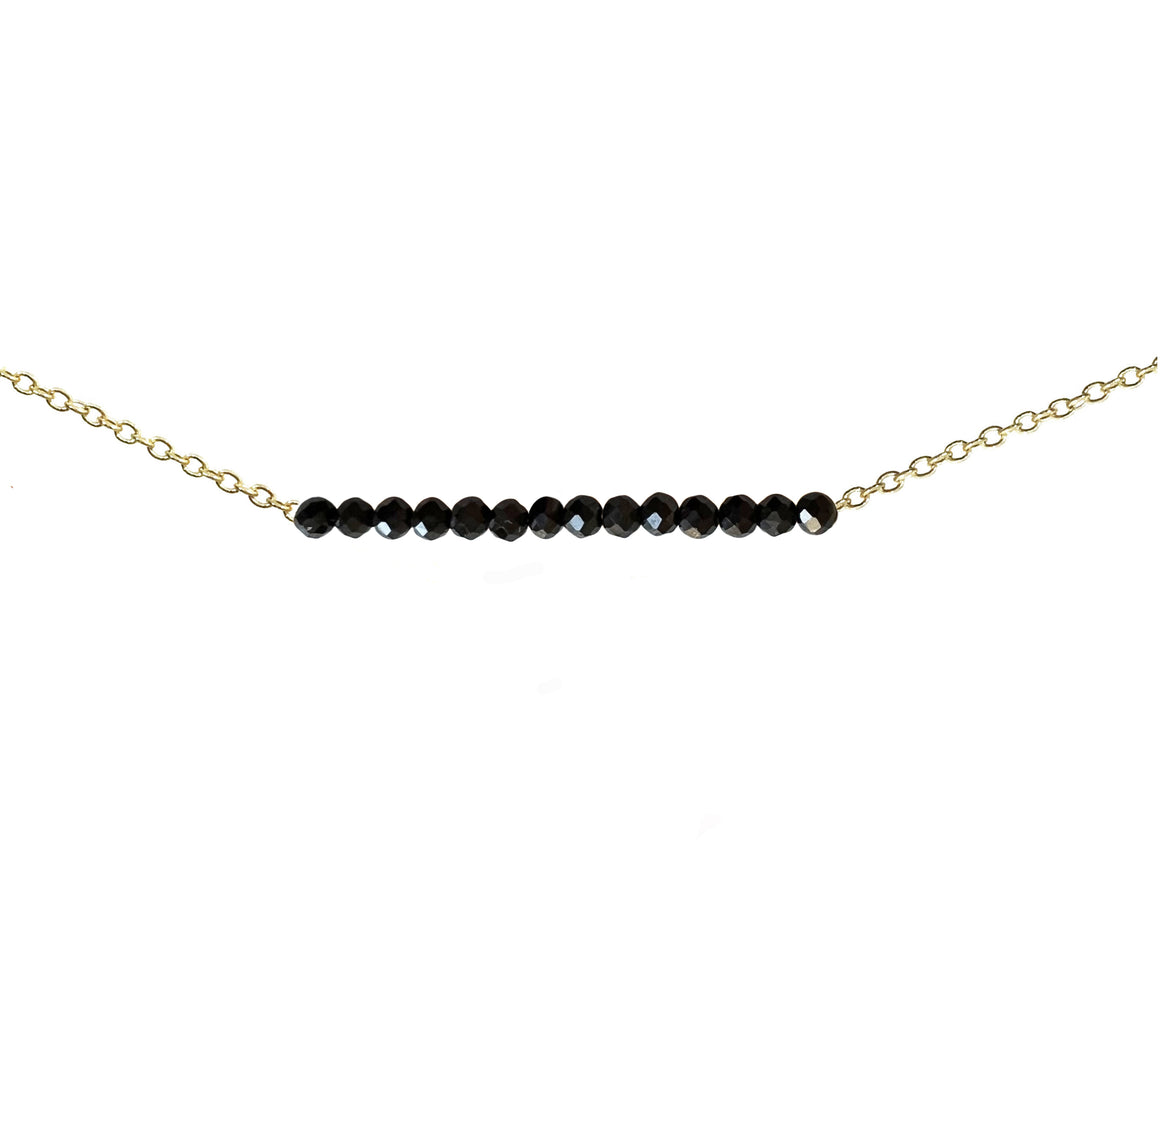 Black Spinel Beaded Necklace